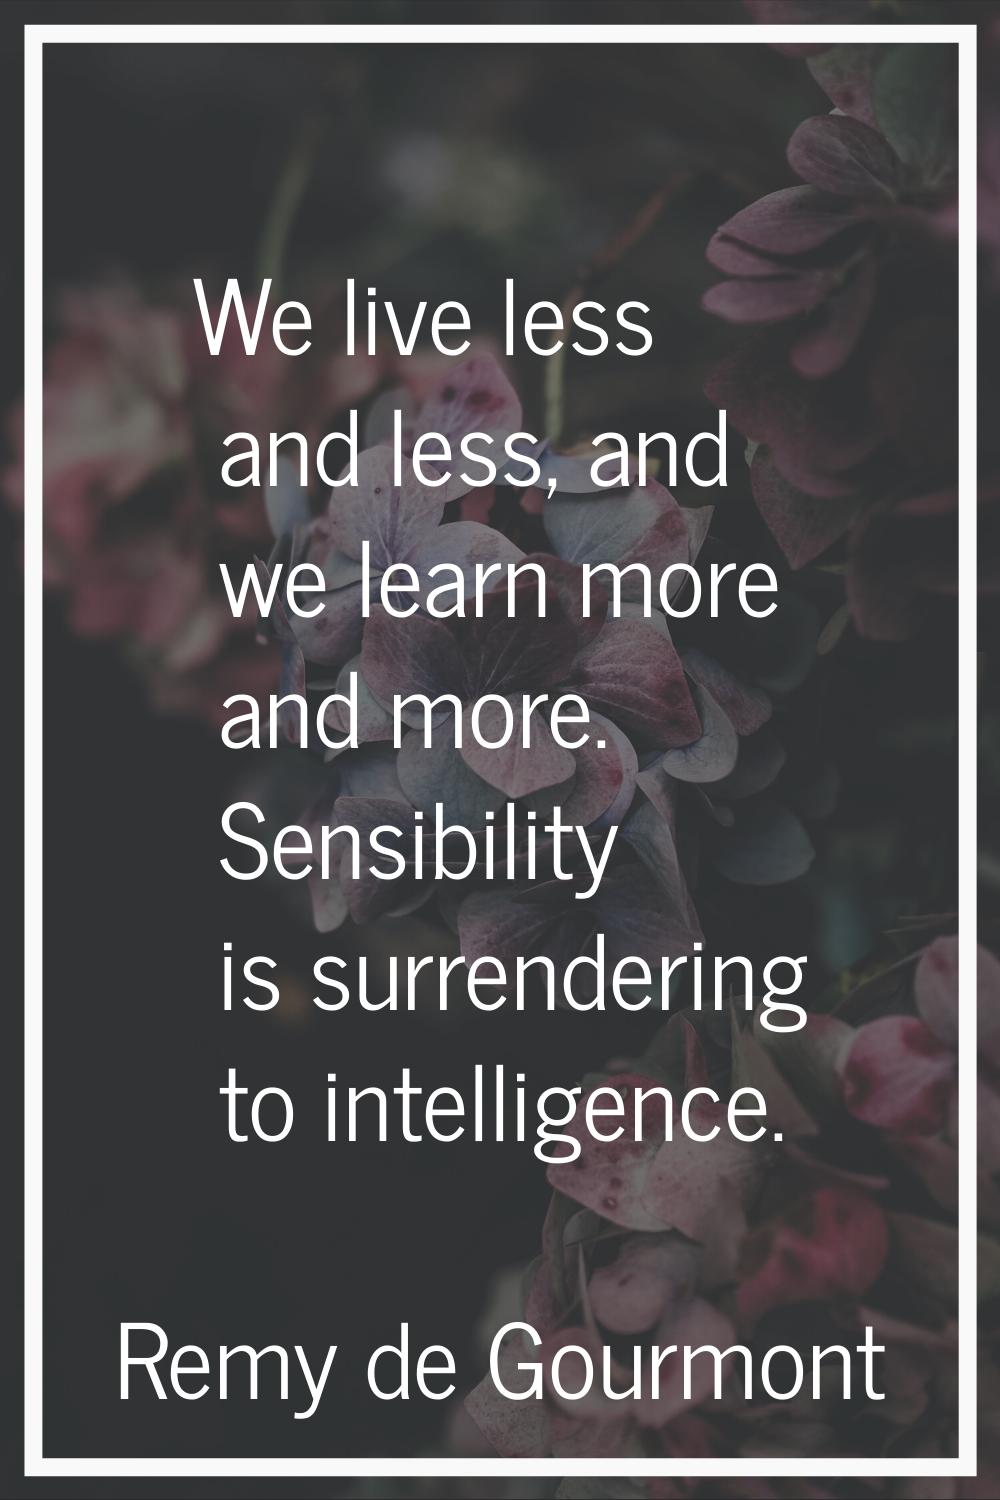 We live less and less, and we learn more and more. Sensibility is surrendering to intelligence.